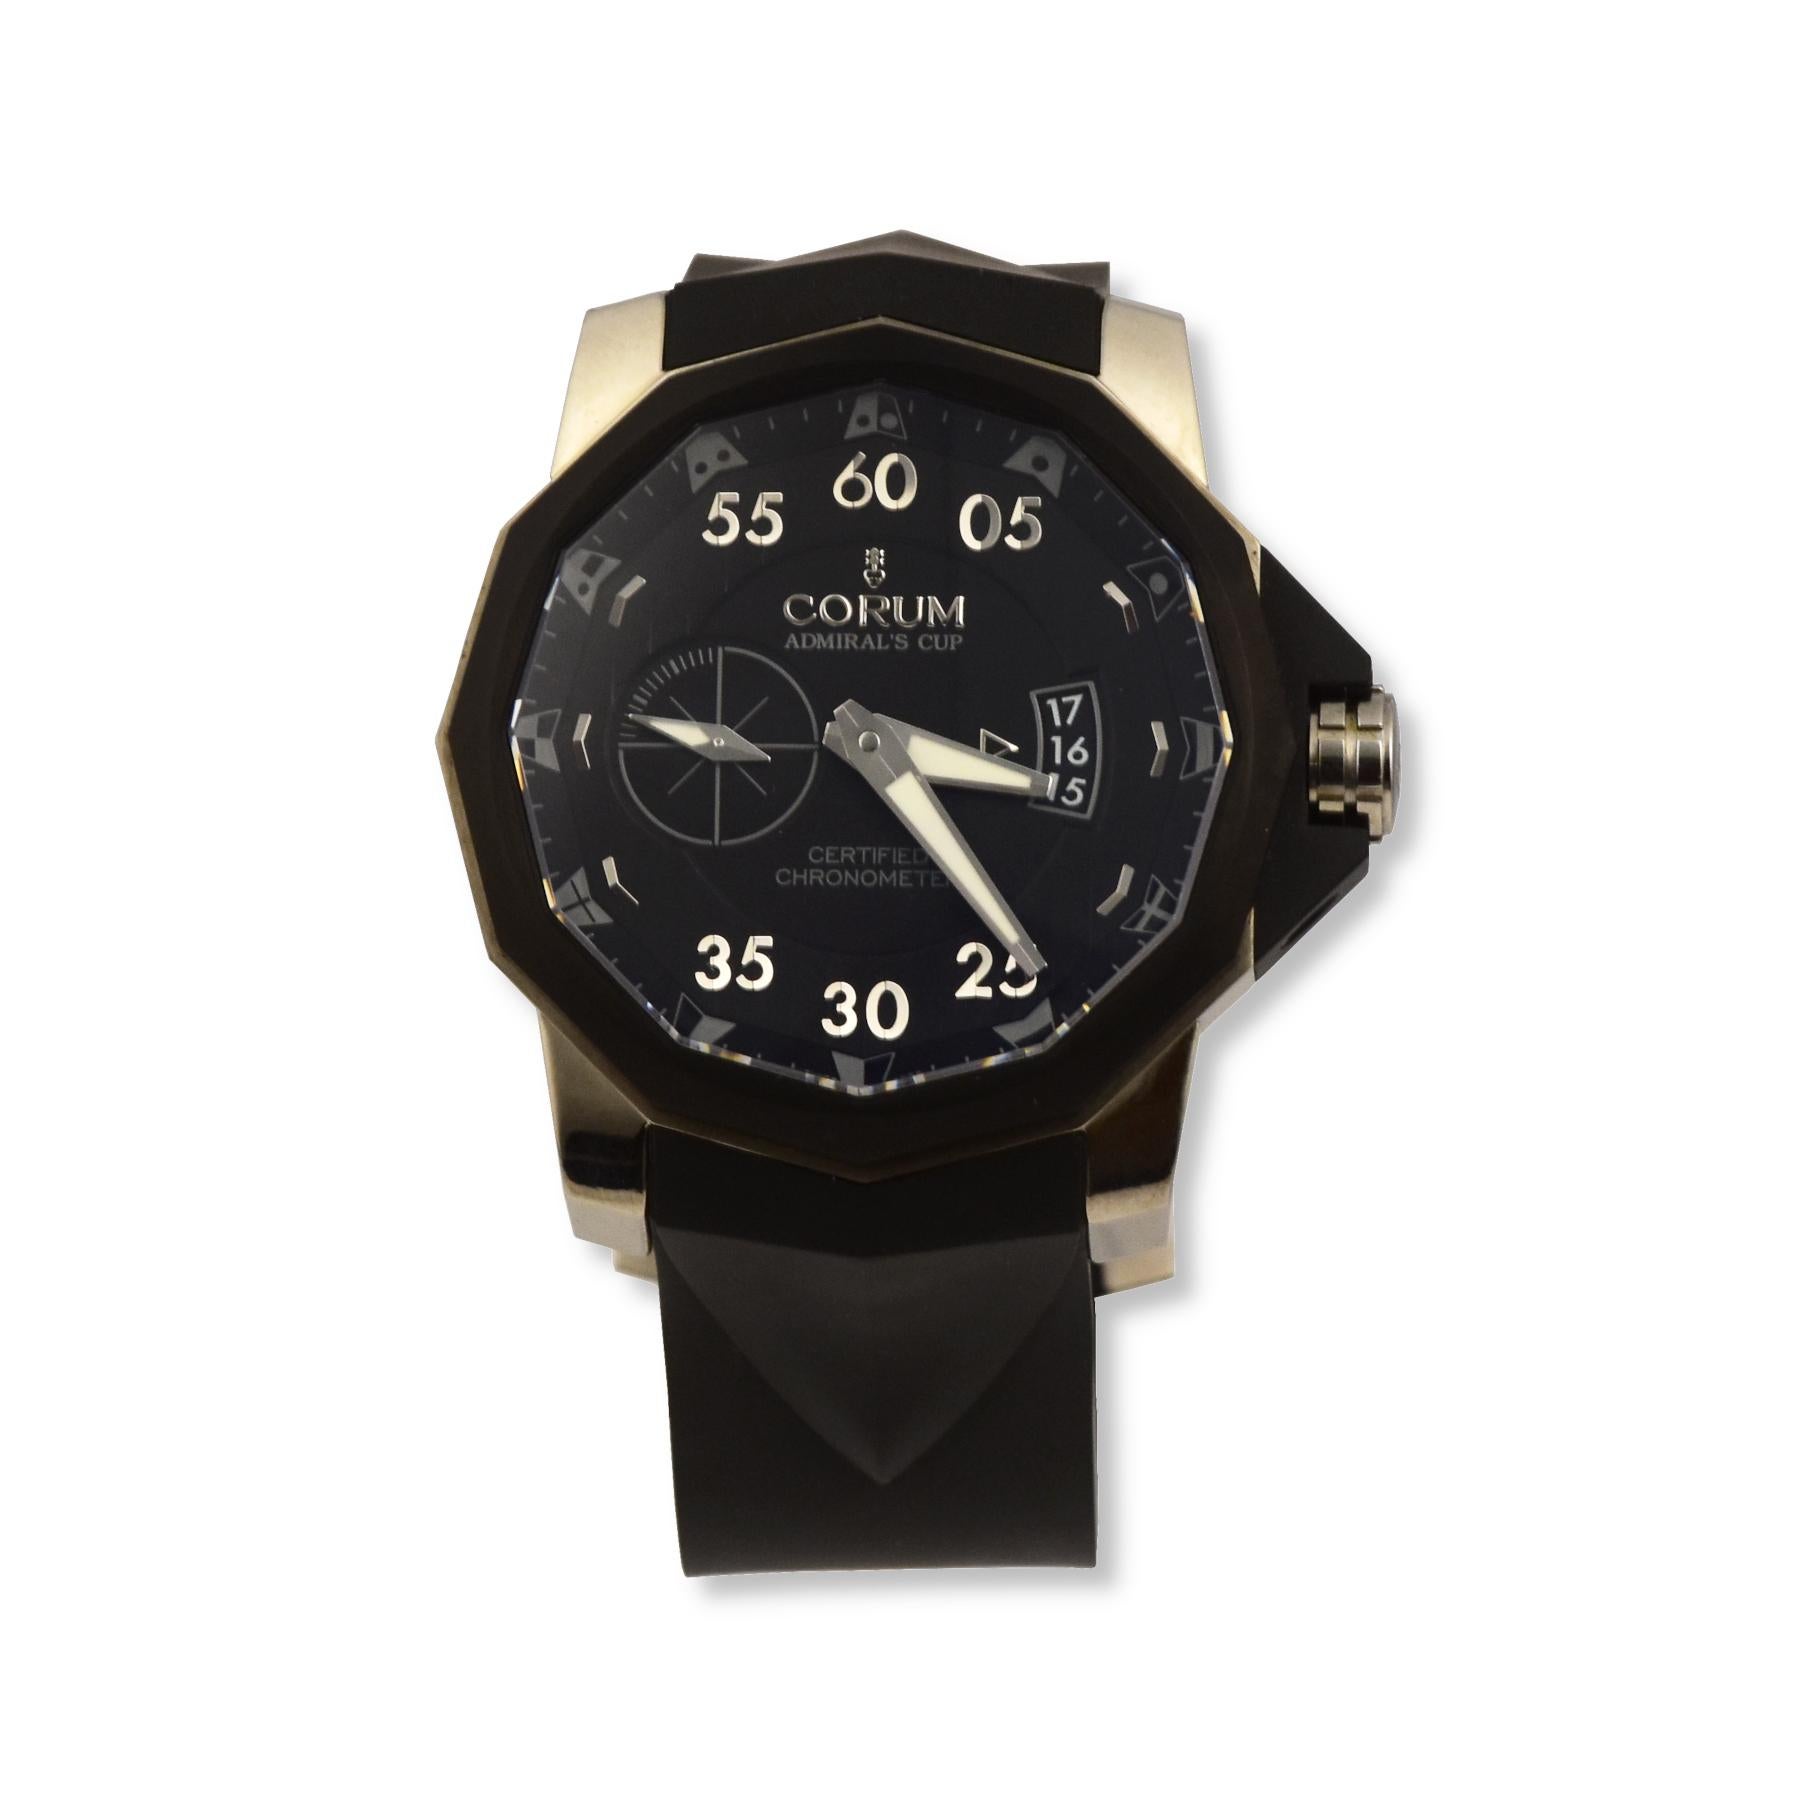 Corum Admirals Cup Seafender is a limited edition piece and is a one of a kind. It's limited to only 595 pieces and is made with Titanium and a rubber strap to accompany the watch. A beautiful 44 MM watch with a black dial that features numbers on